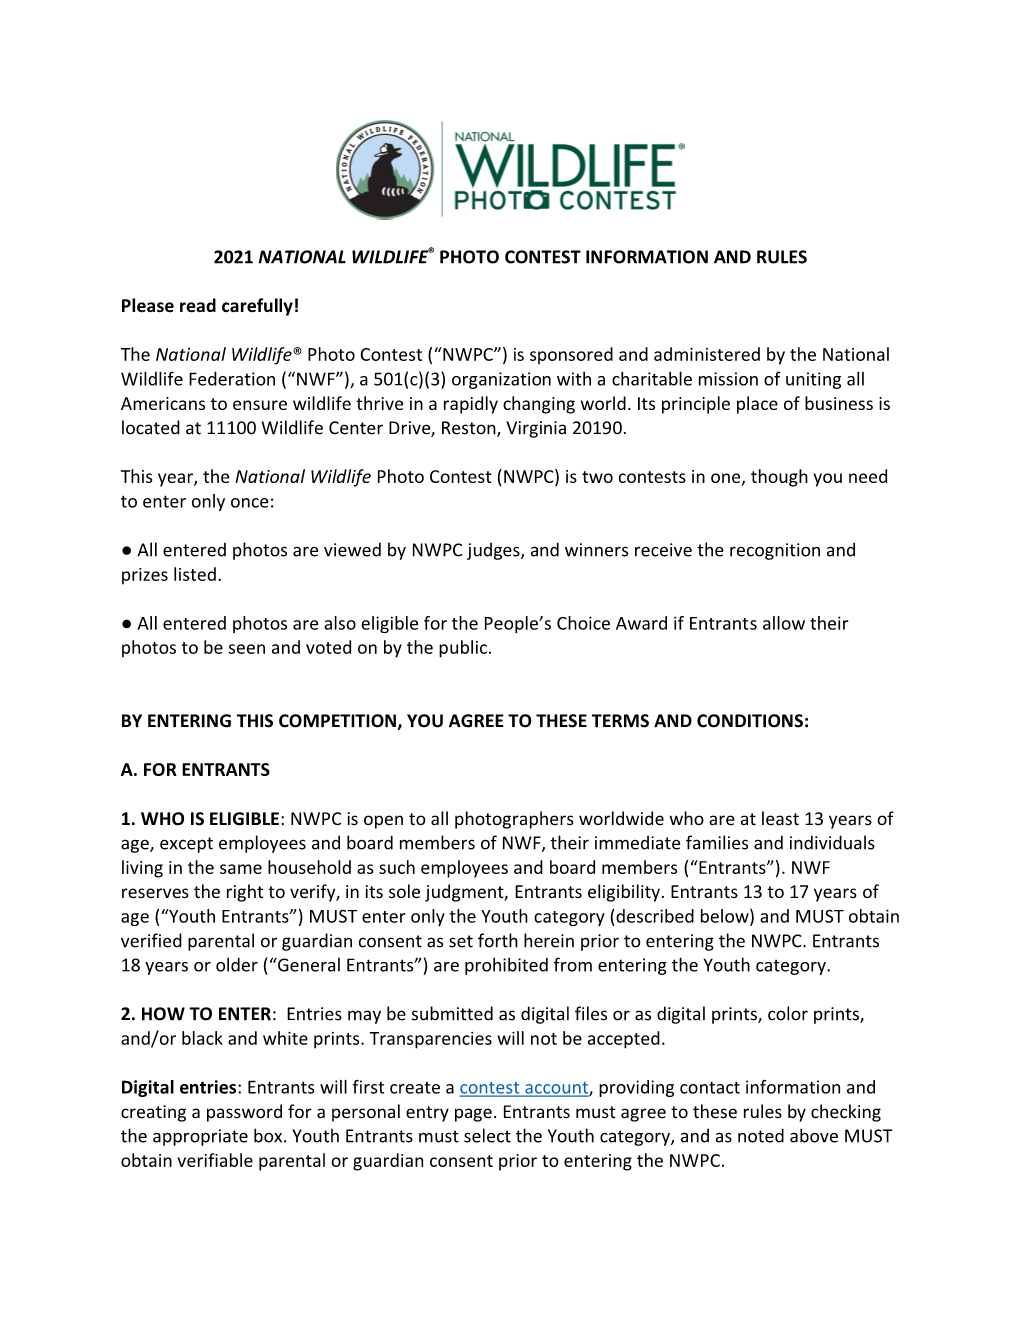 2021 National Wildlife® Photo Contest Information and Rules